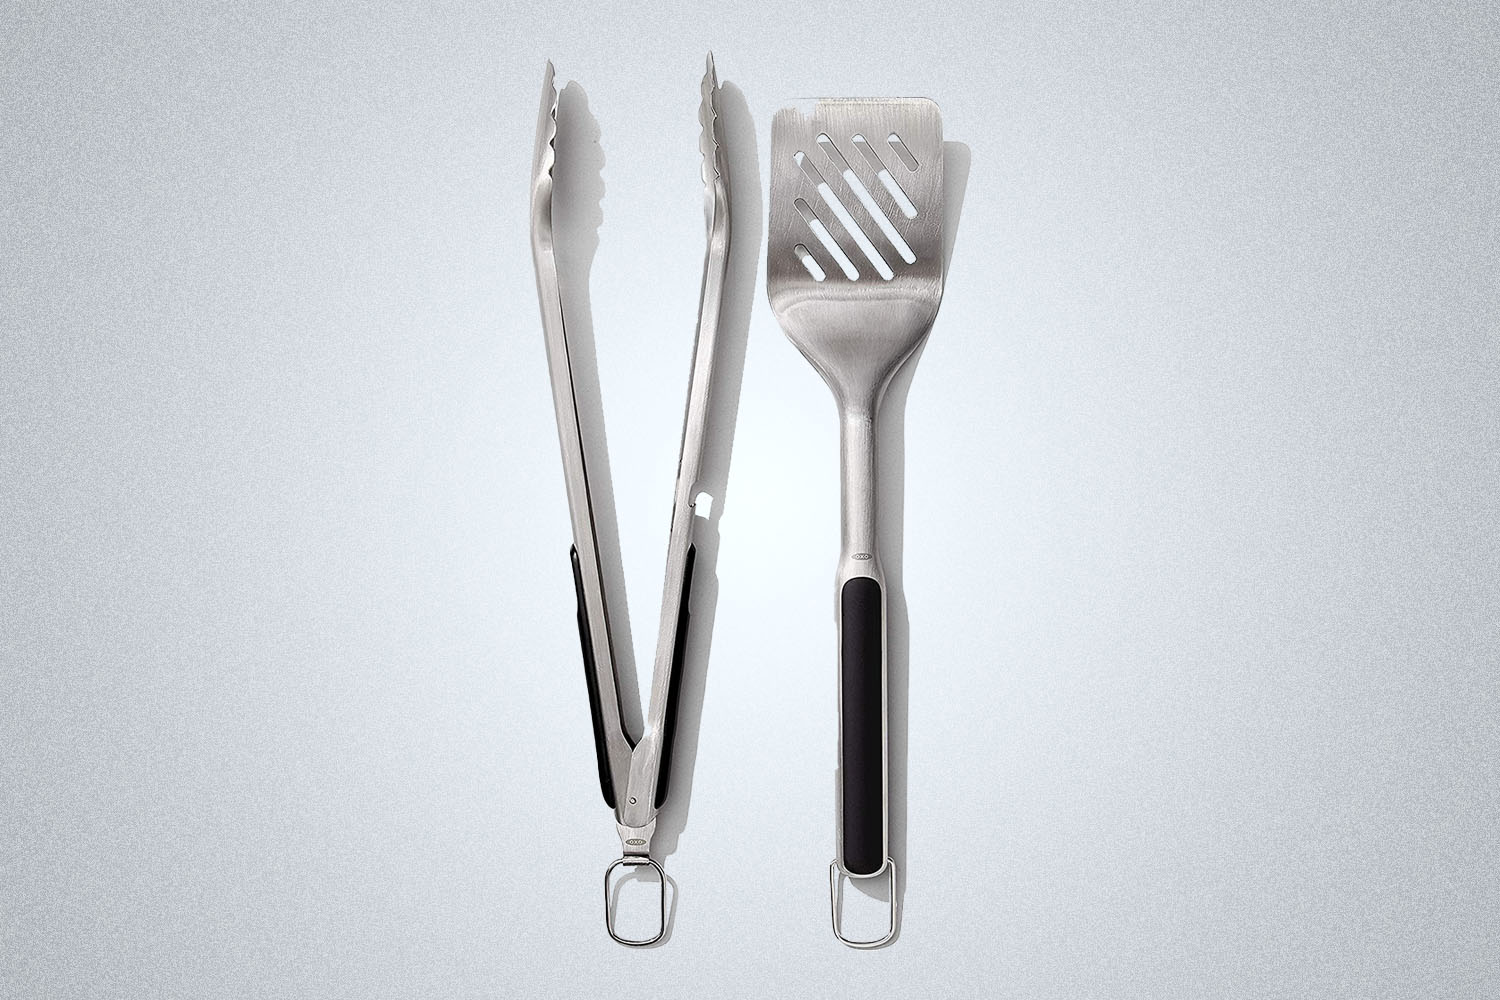 two OXO grilling tools from Amazon on a grey background